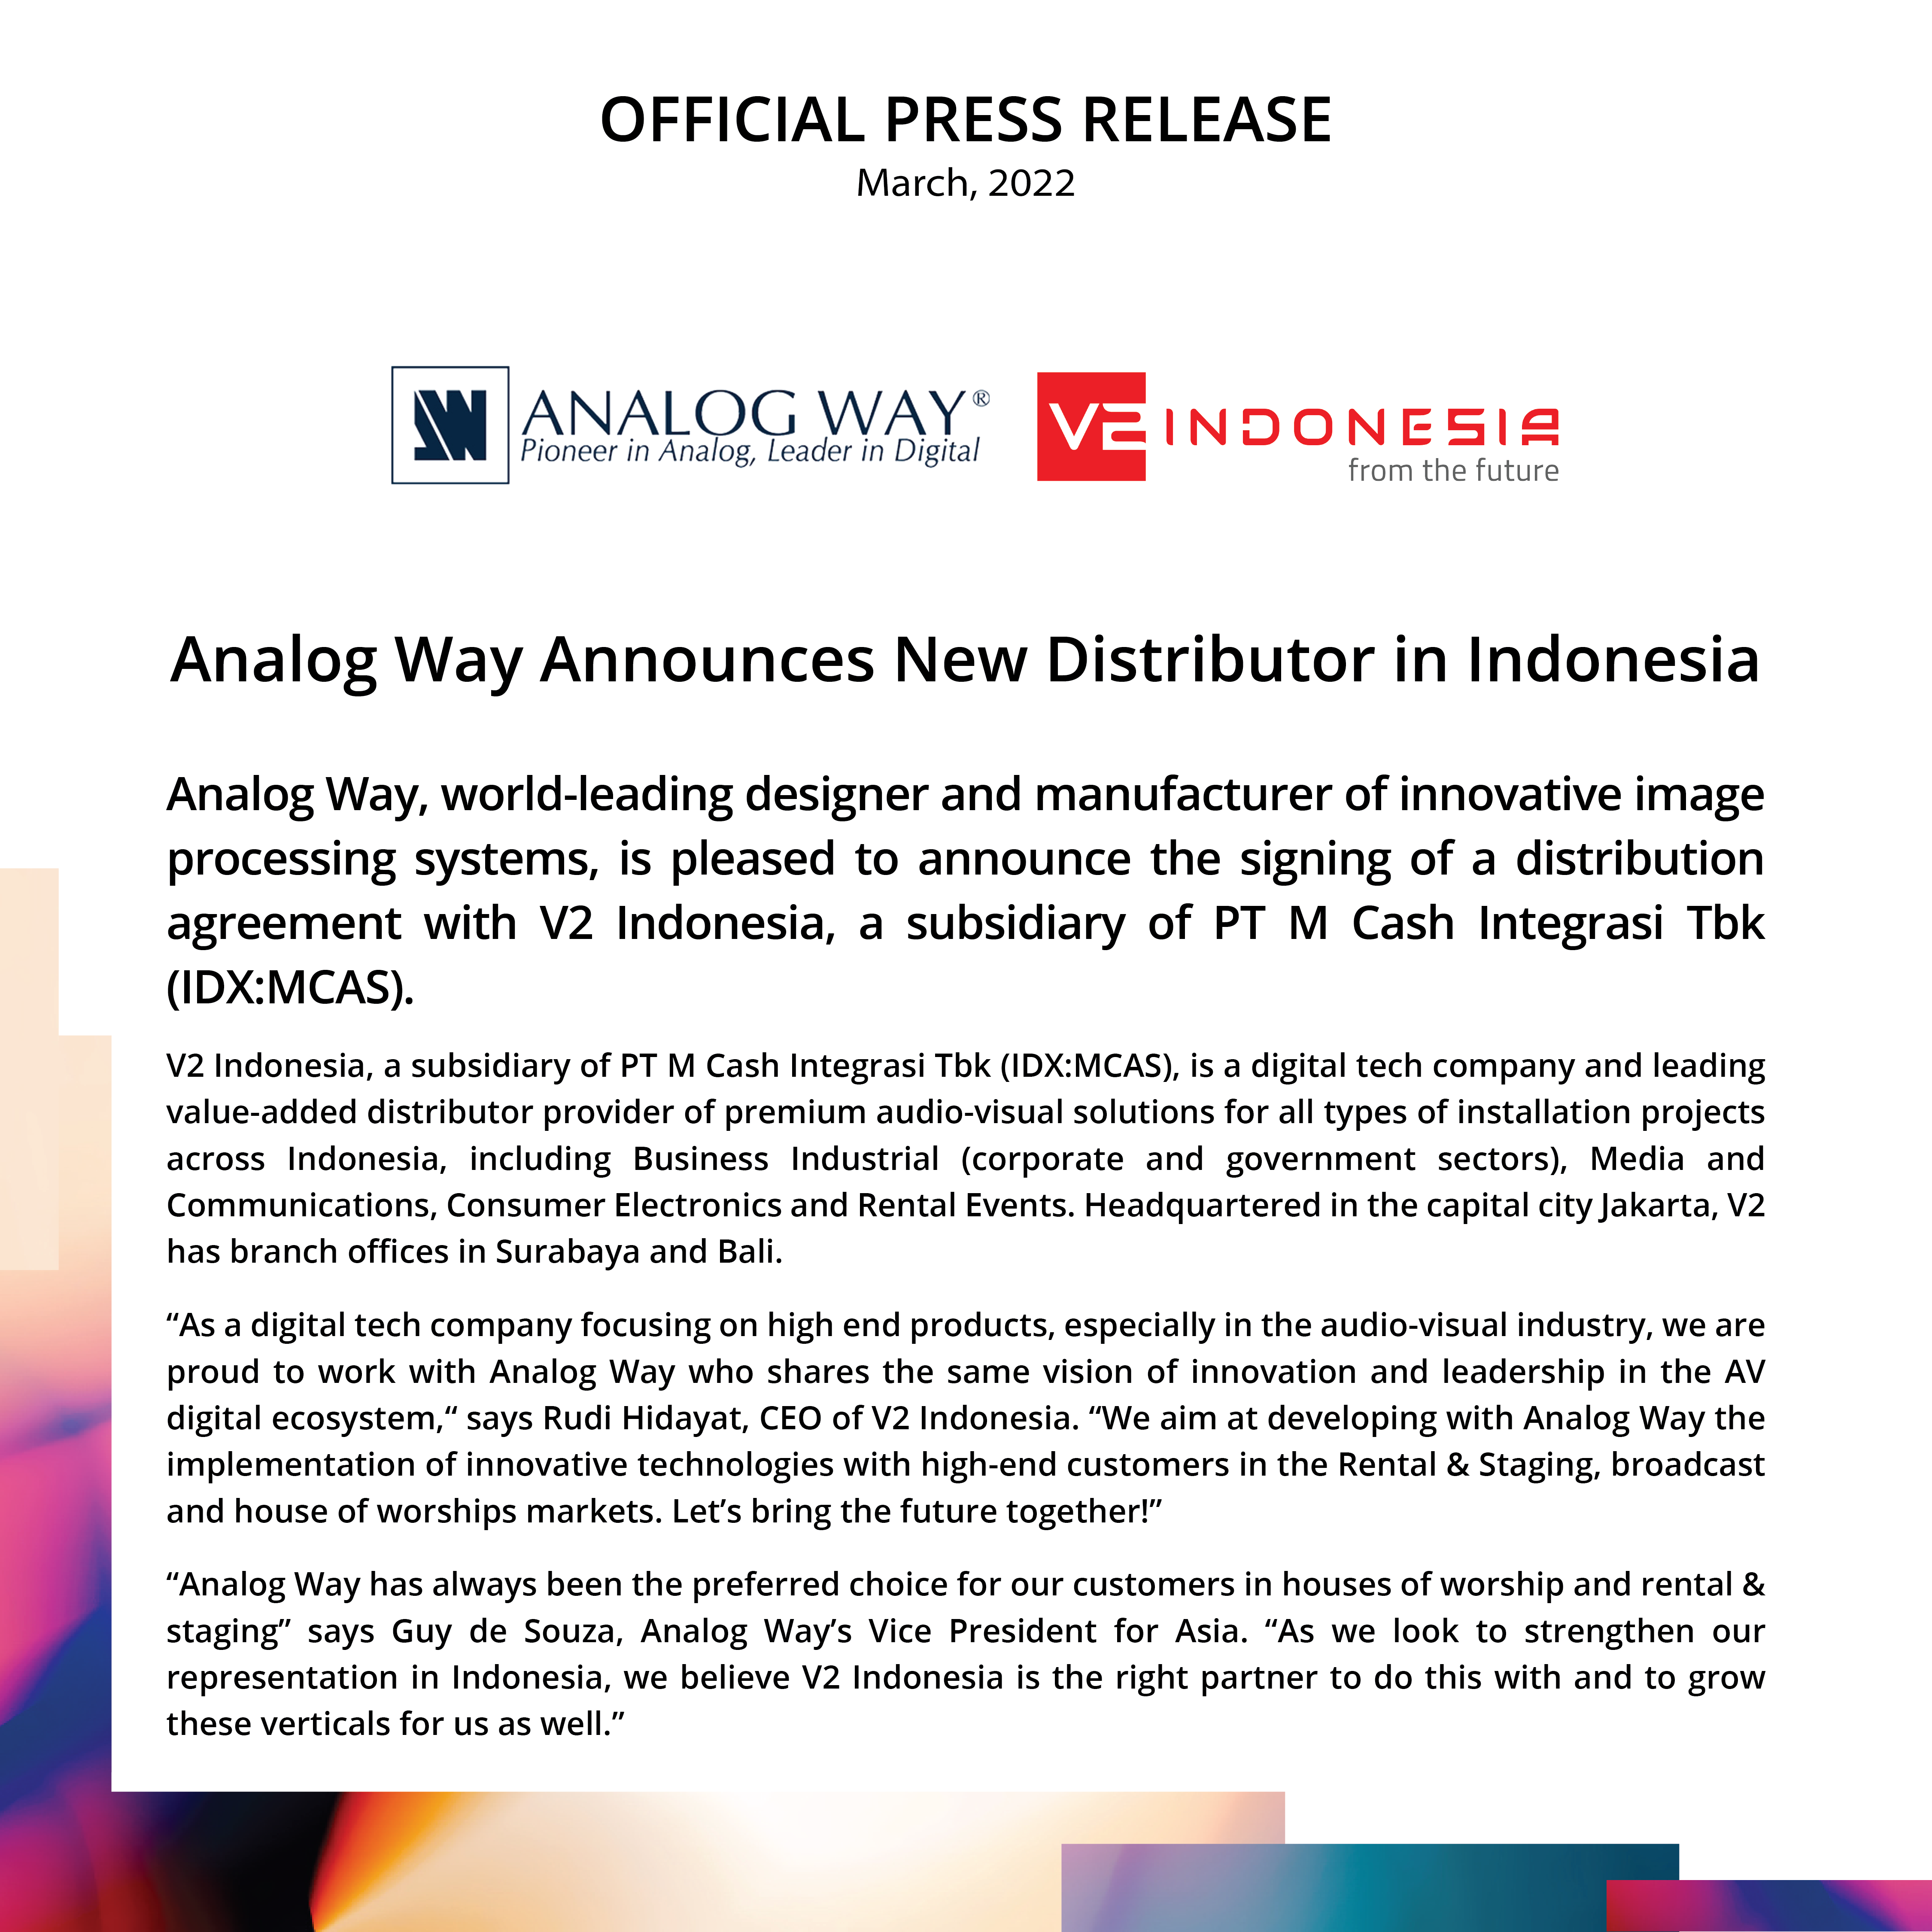 Analog Way Announces New Distributor in Indonesia